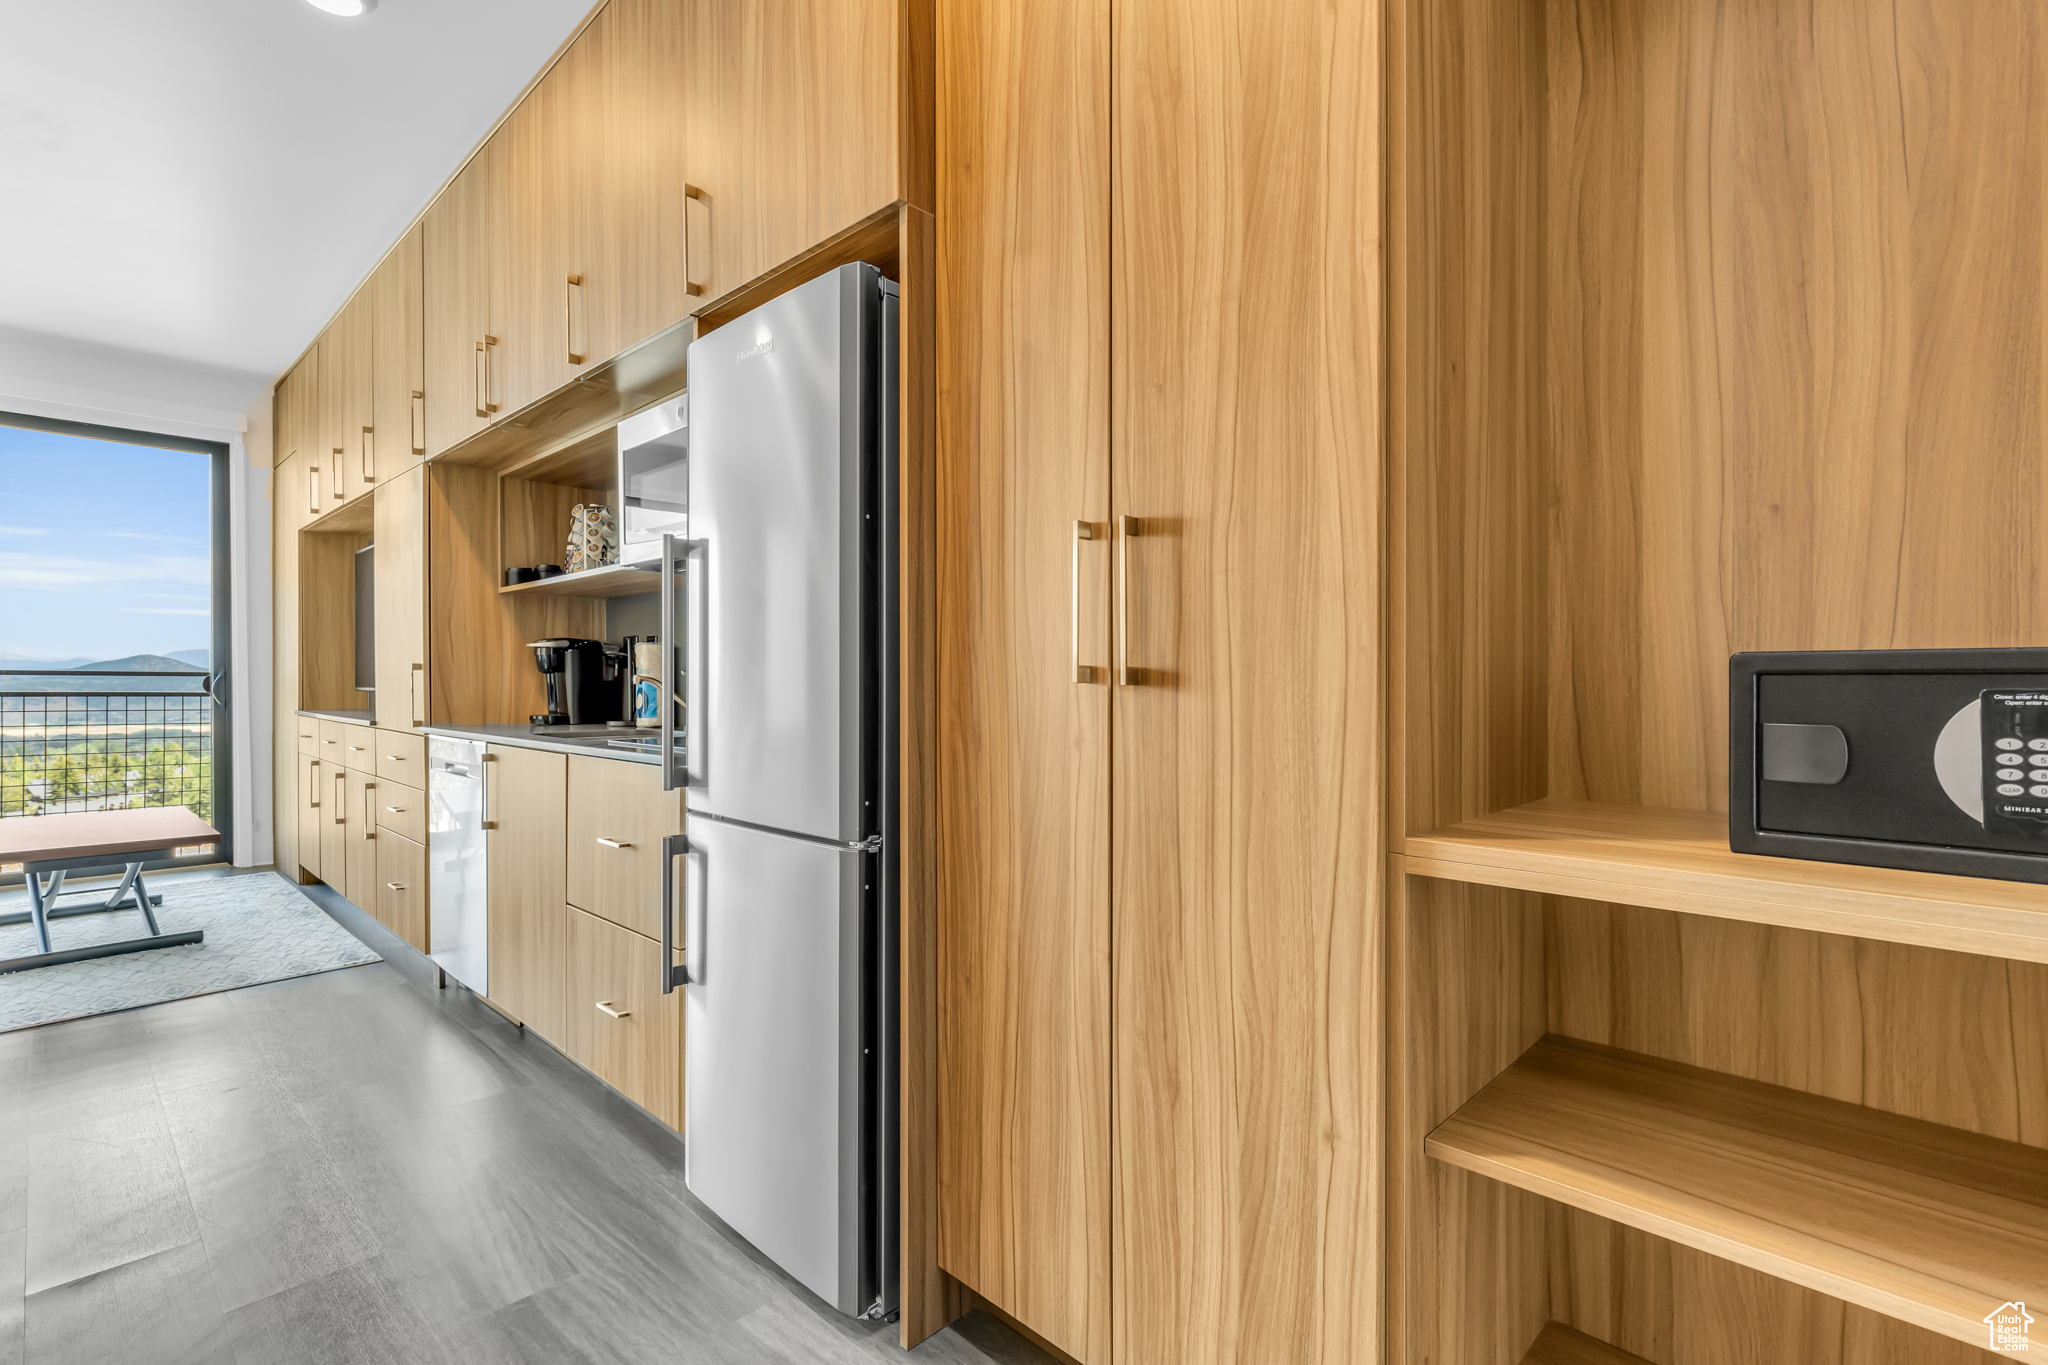 Kitchen featuring light brown cabinets, light tile flooring, and stainless steel fridge